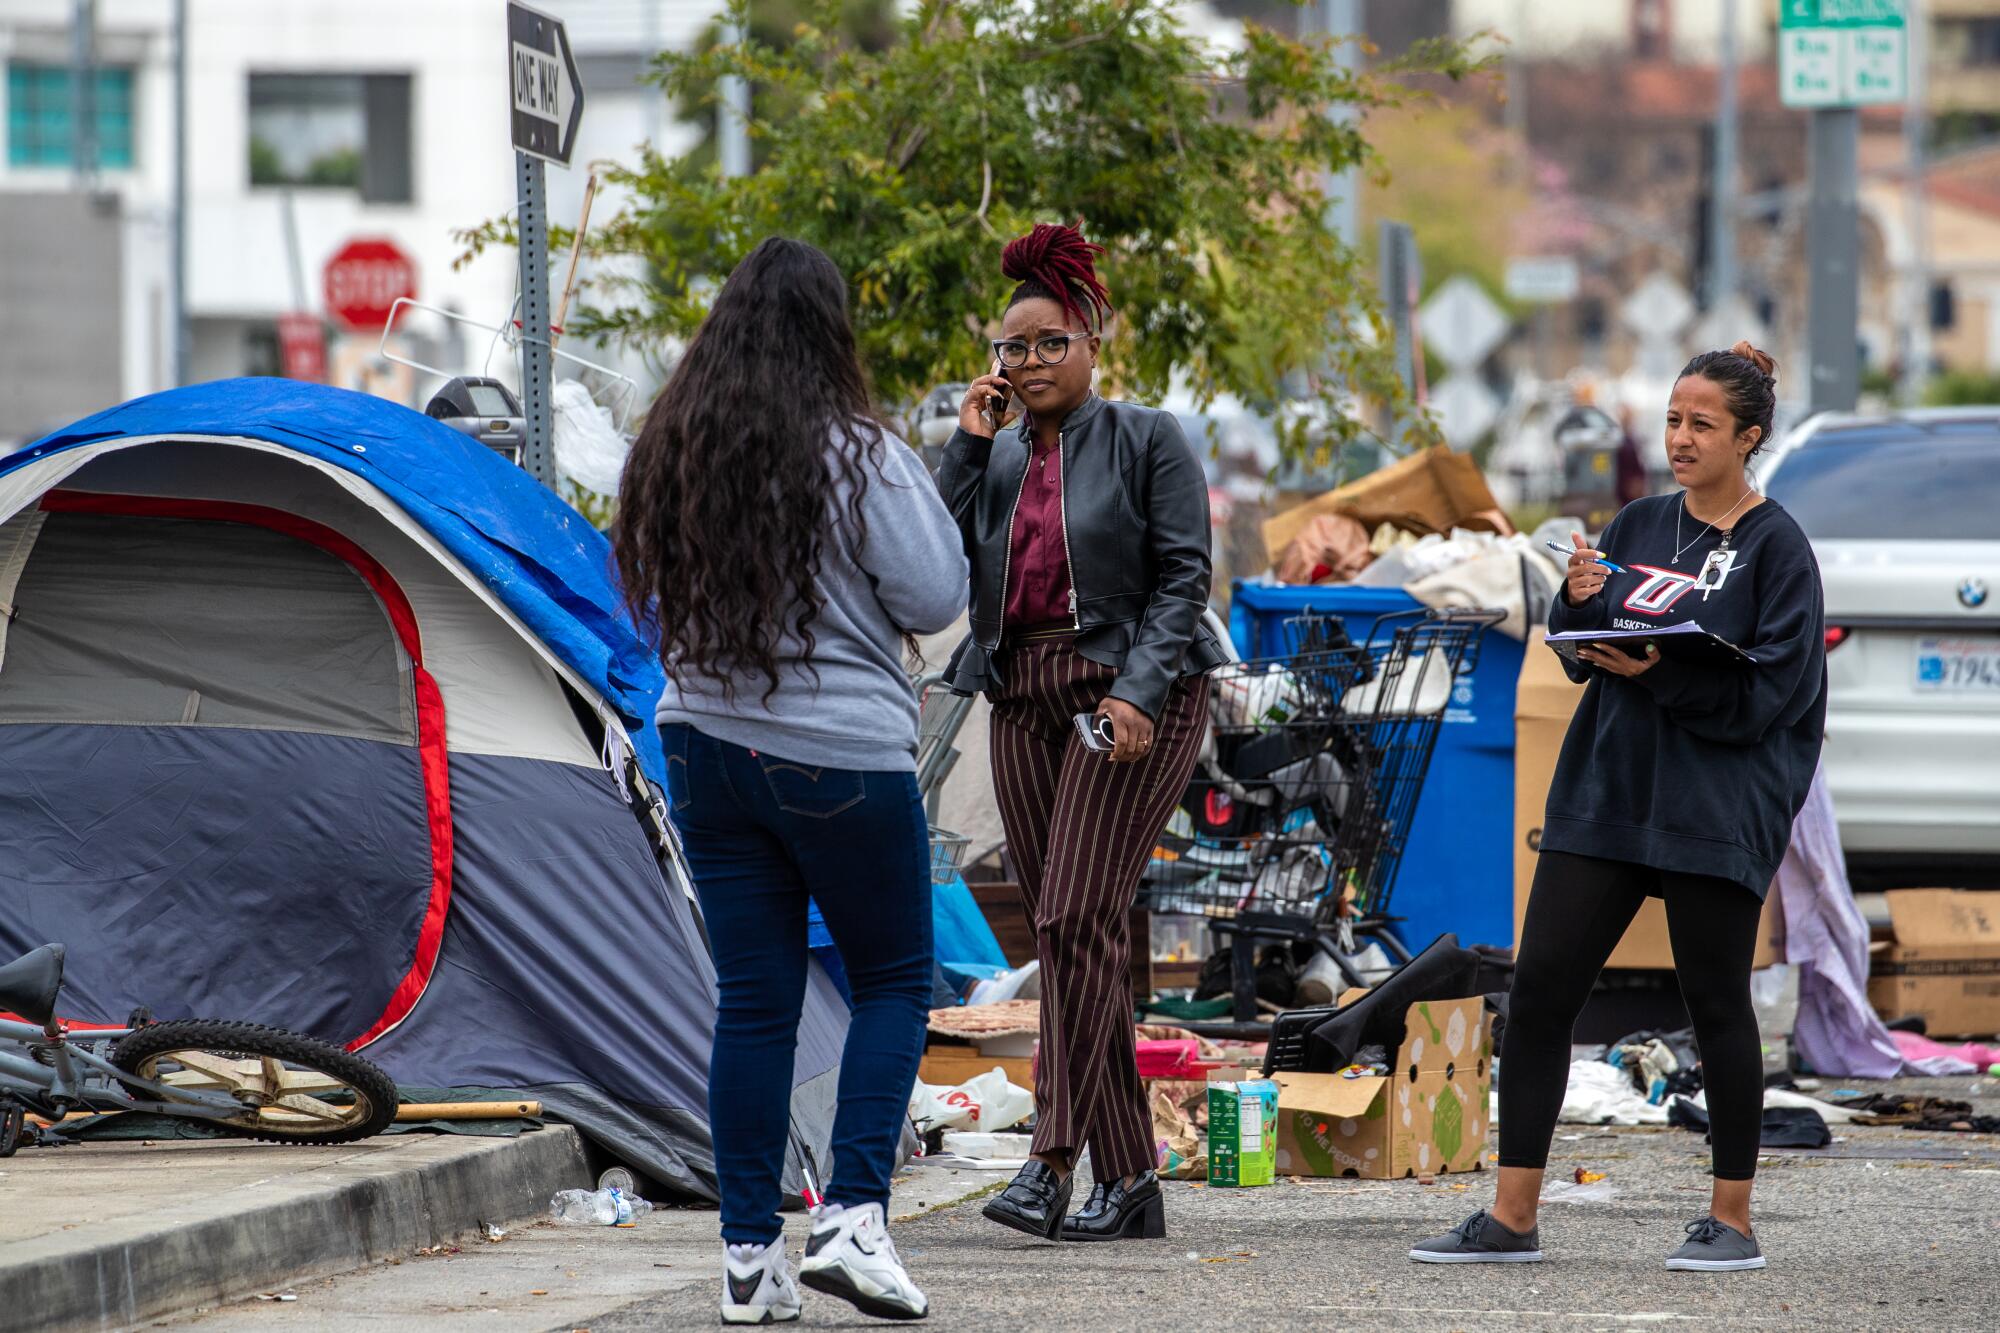 Two women speak to a third at an encampment on San Vicente Boulevard where tents and belongings cover the sidewalk